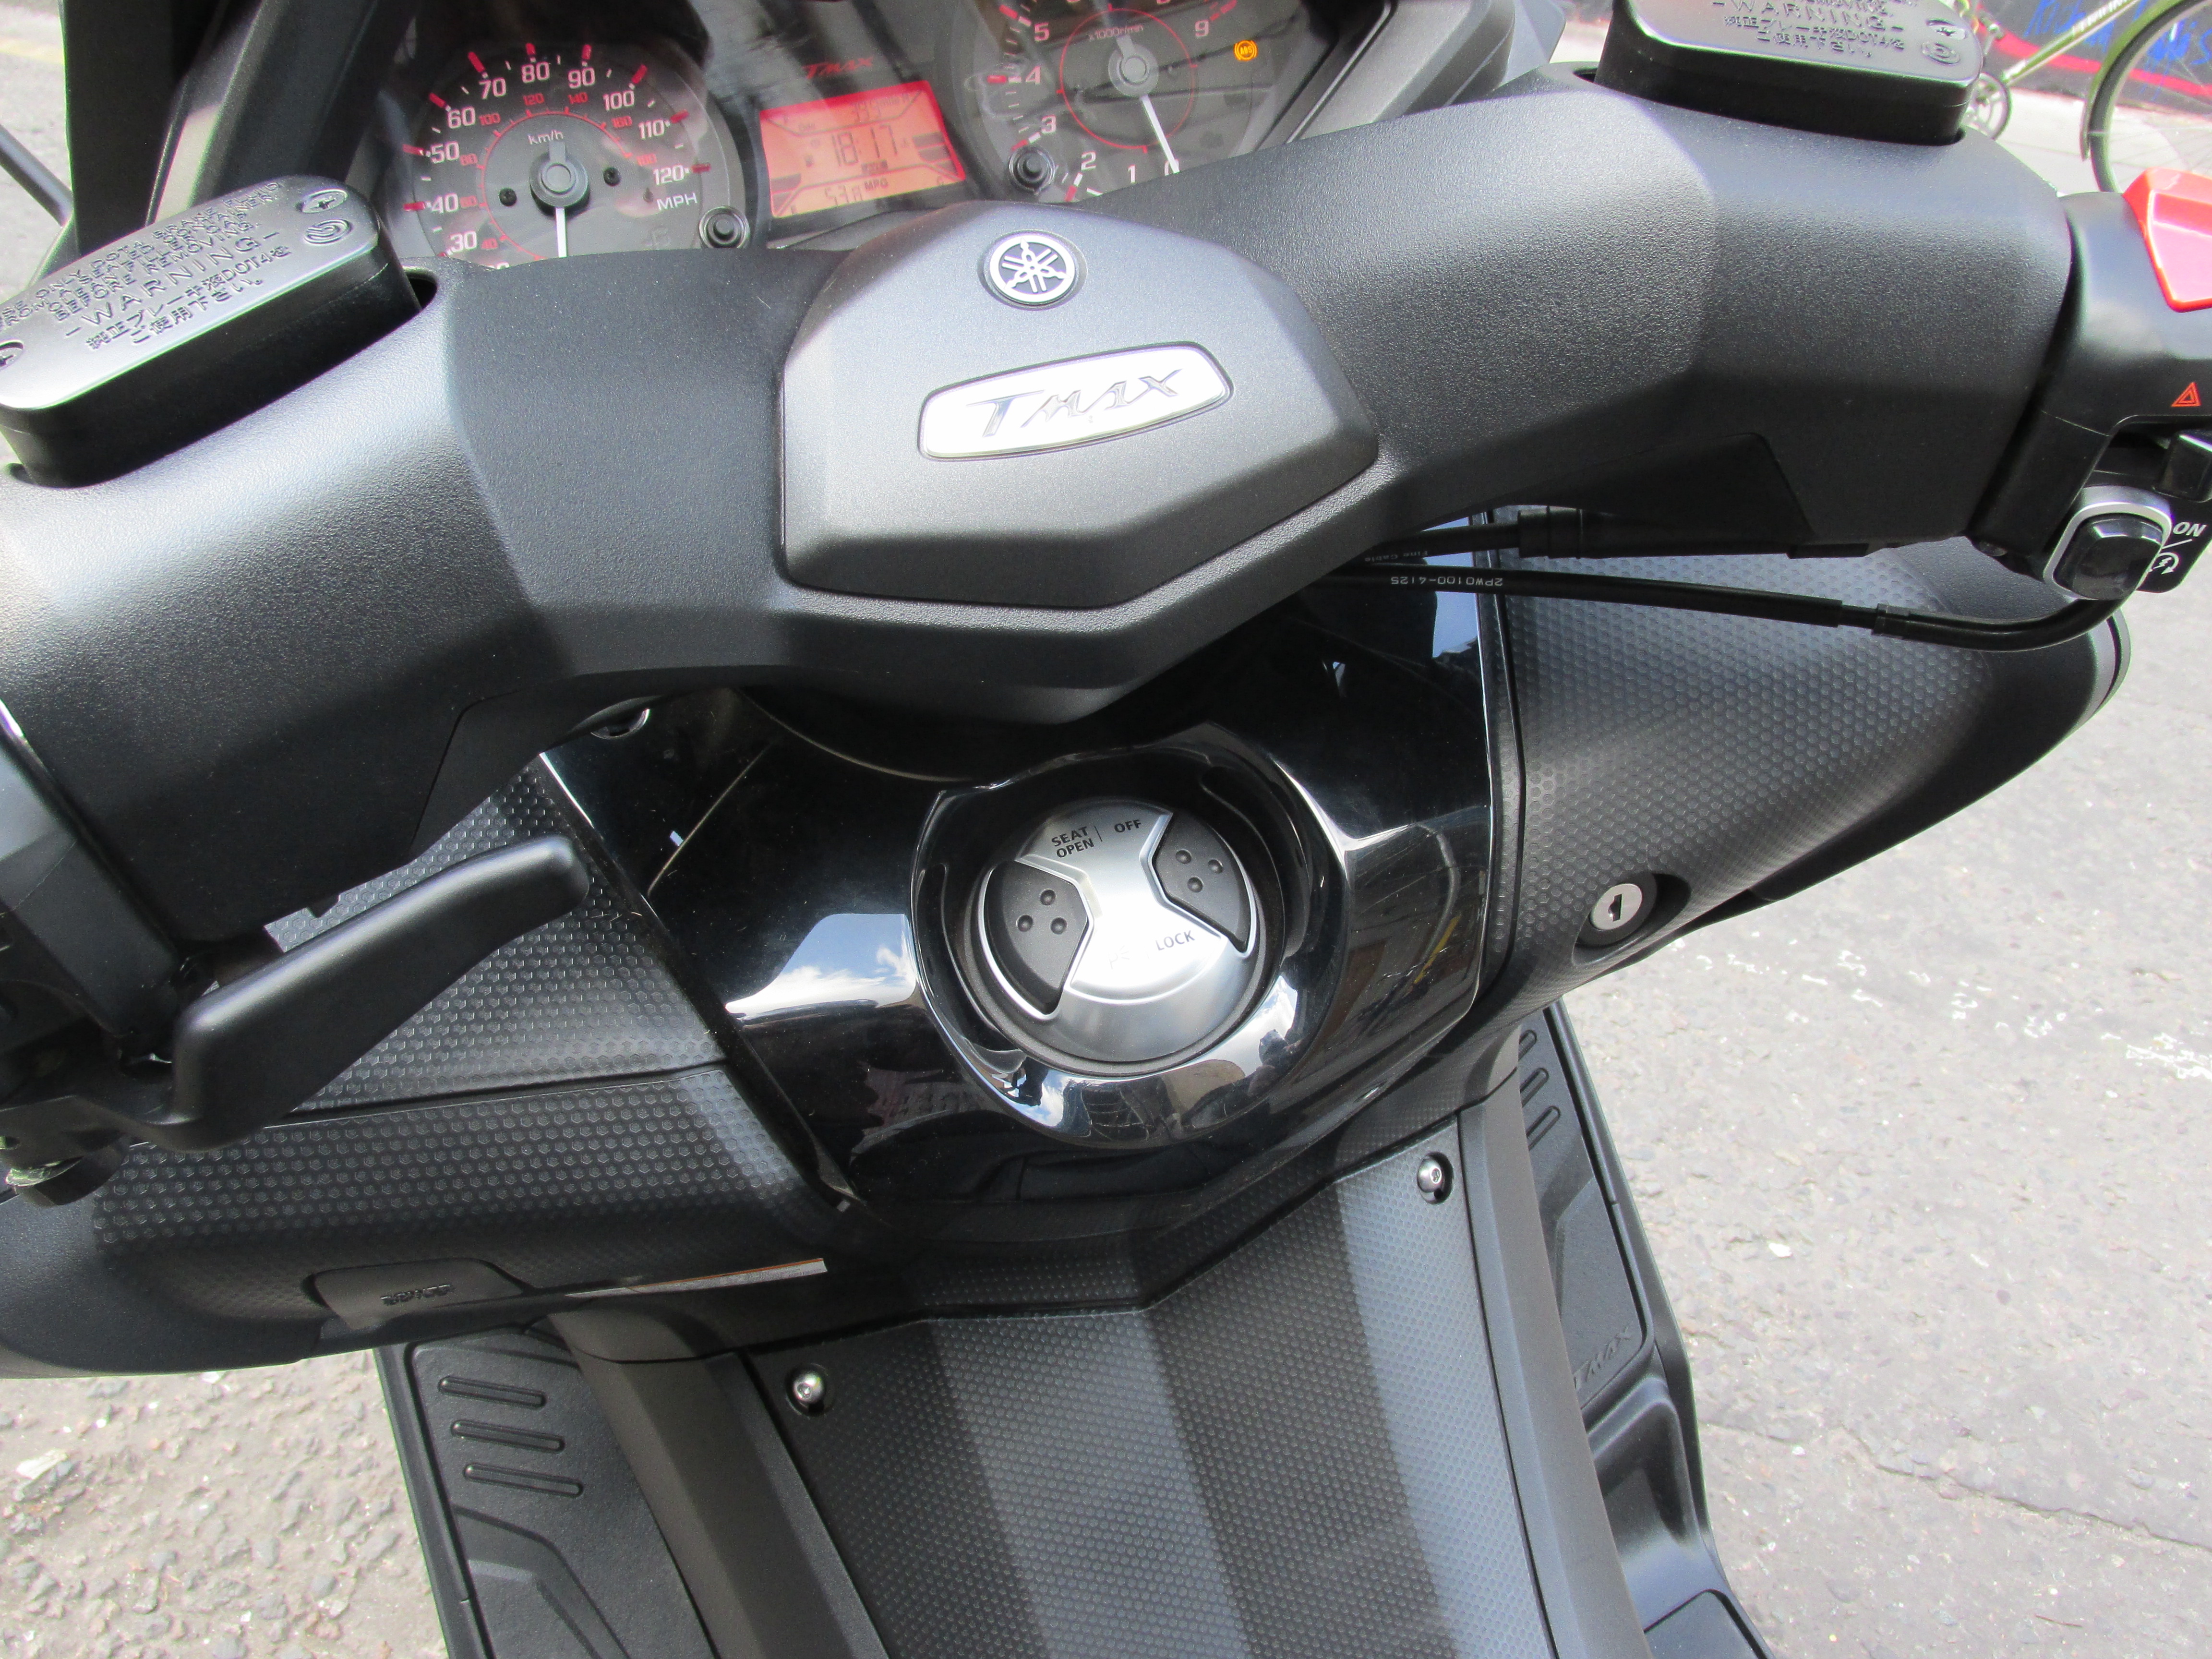 First ride: Yamaha TMAX review